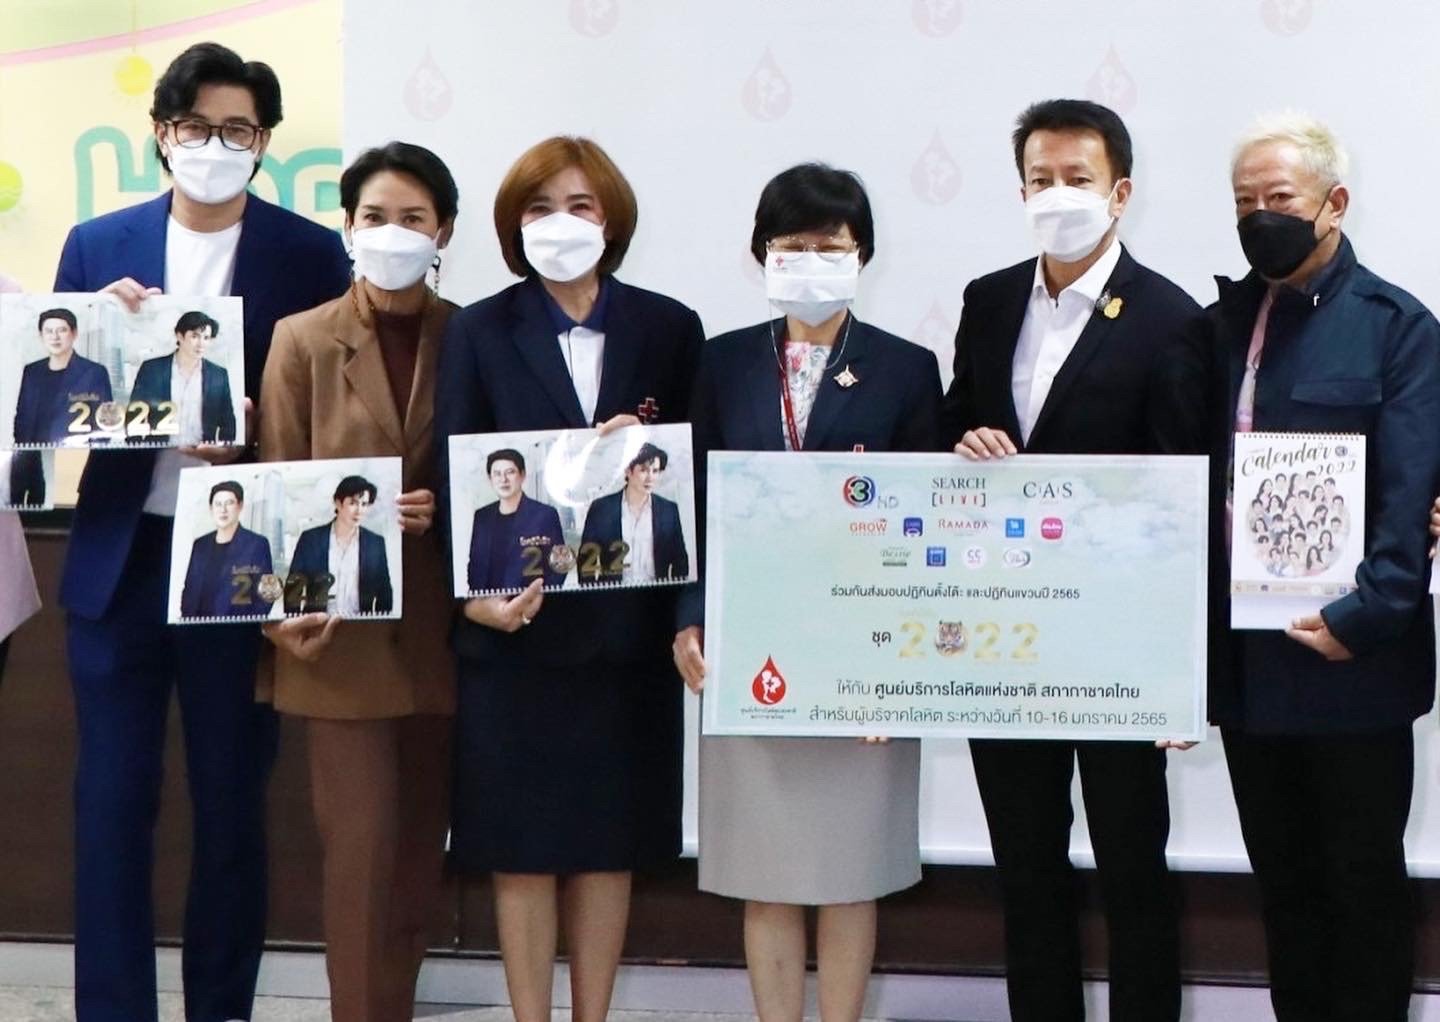 BEC handed over Channel 3 calenda to Thai Red Cross